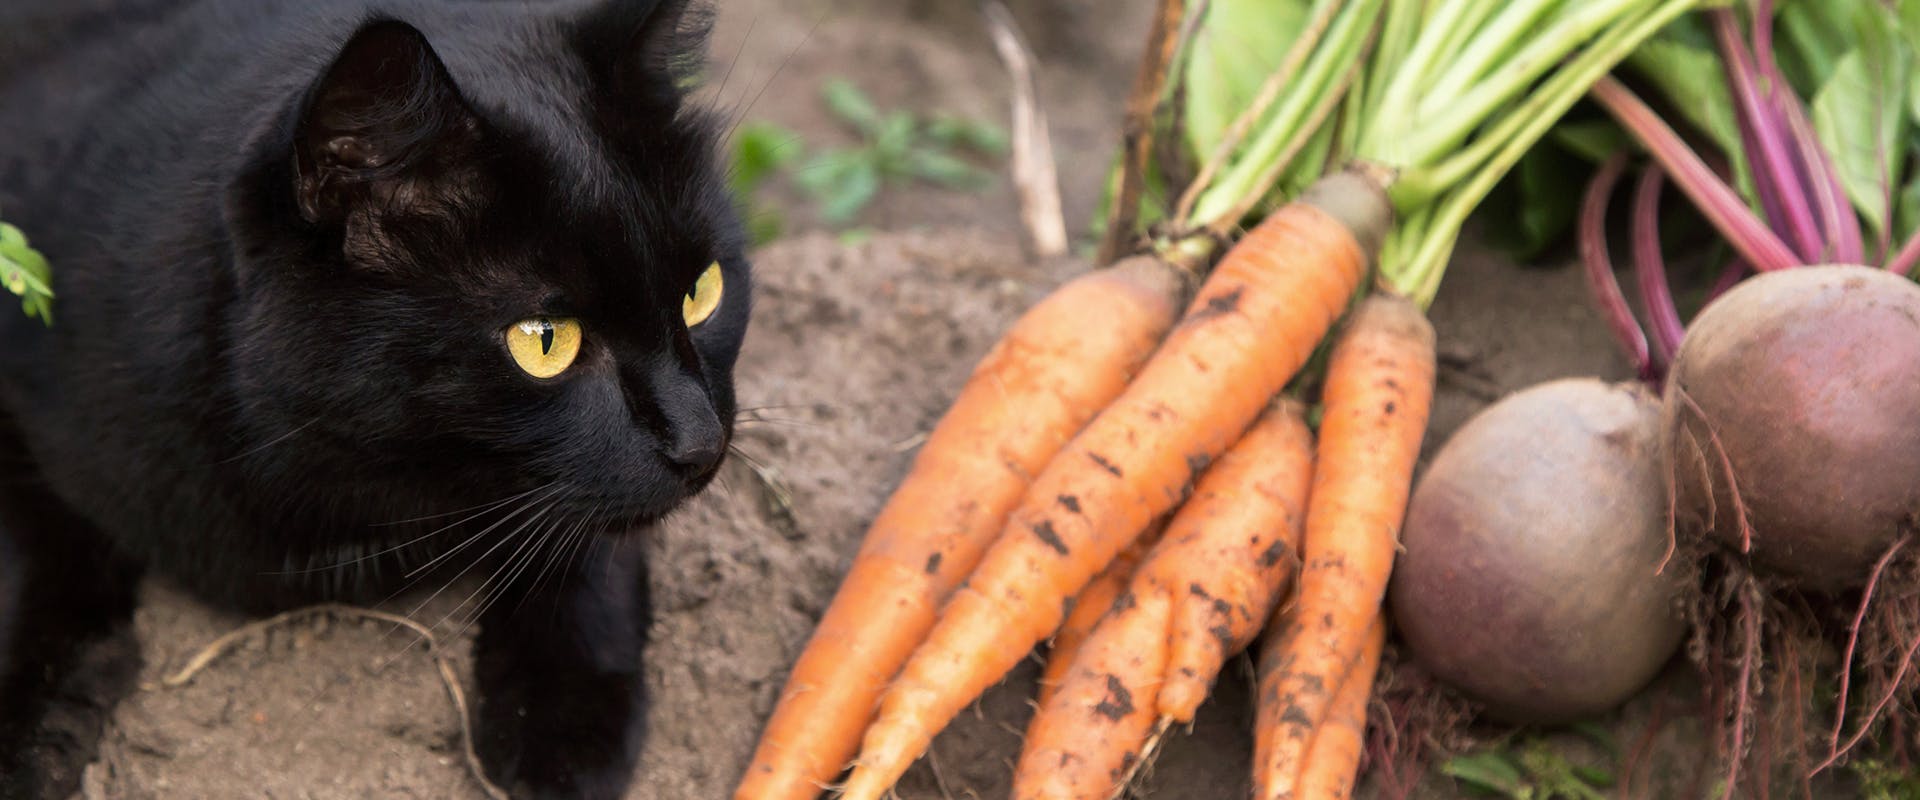 A cat sitting in a vegetable patch next to a bunch of carrots